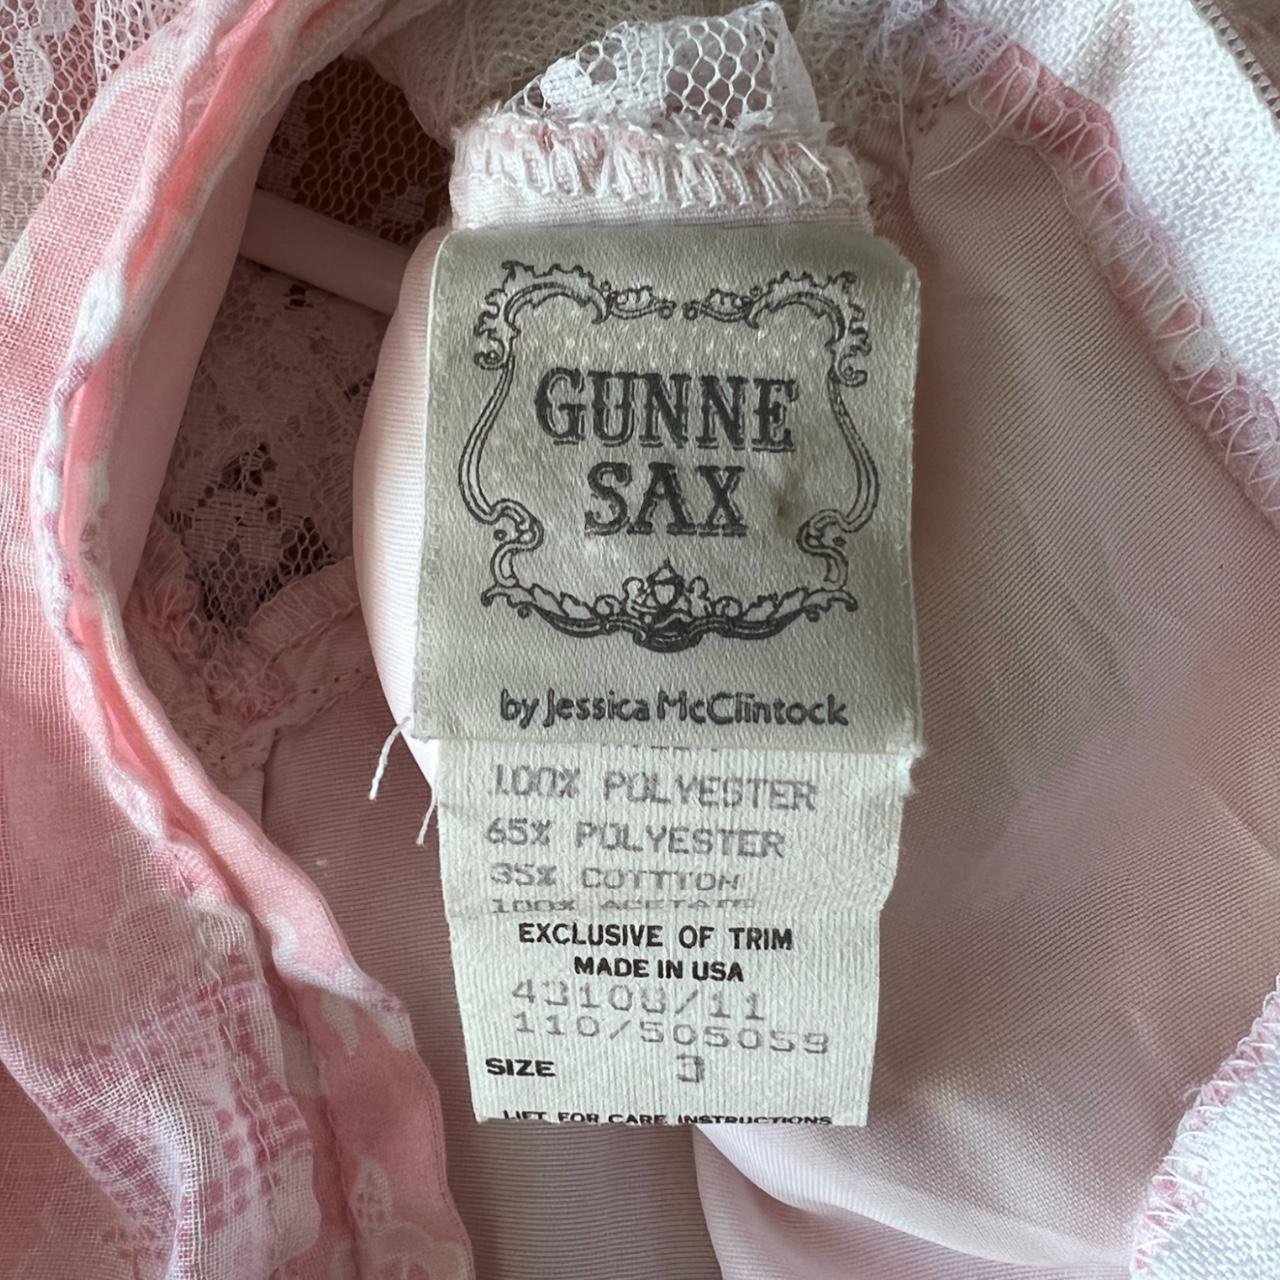 Any info on this Jessica McClintock dress that is NOT for Gunne Sax? :  r/Depop